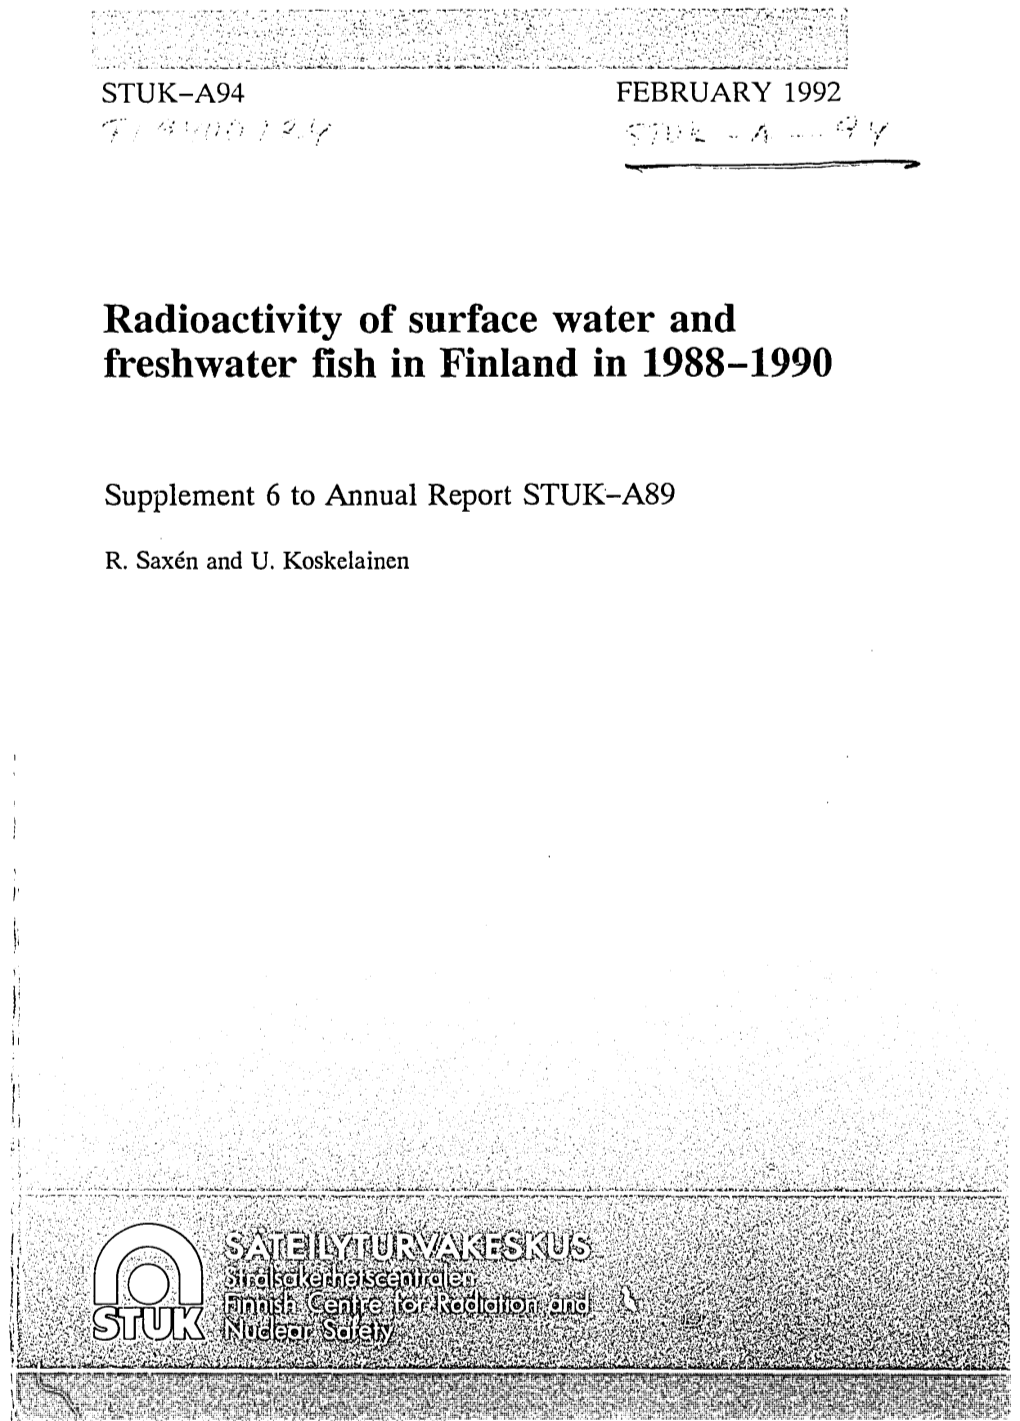 Radioactivity of Surface Water and Freshwater Fish in Finland in 1988-1990